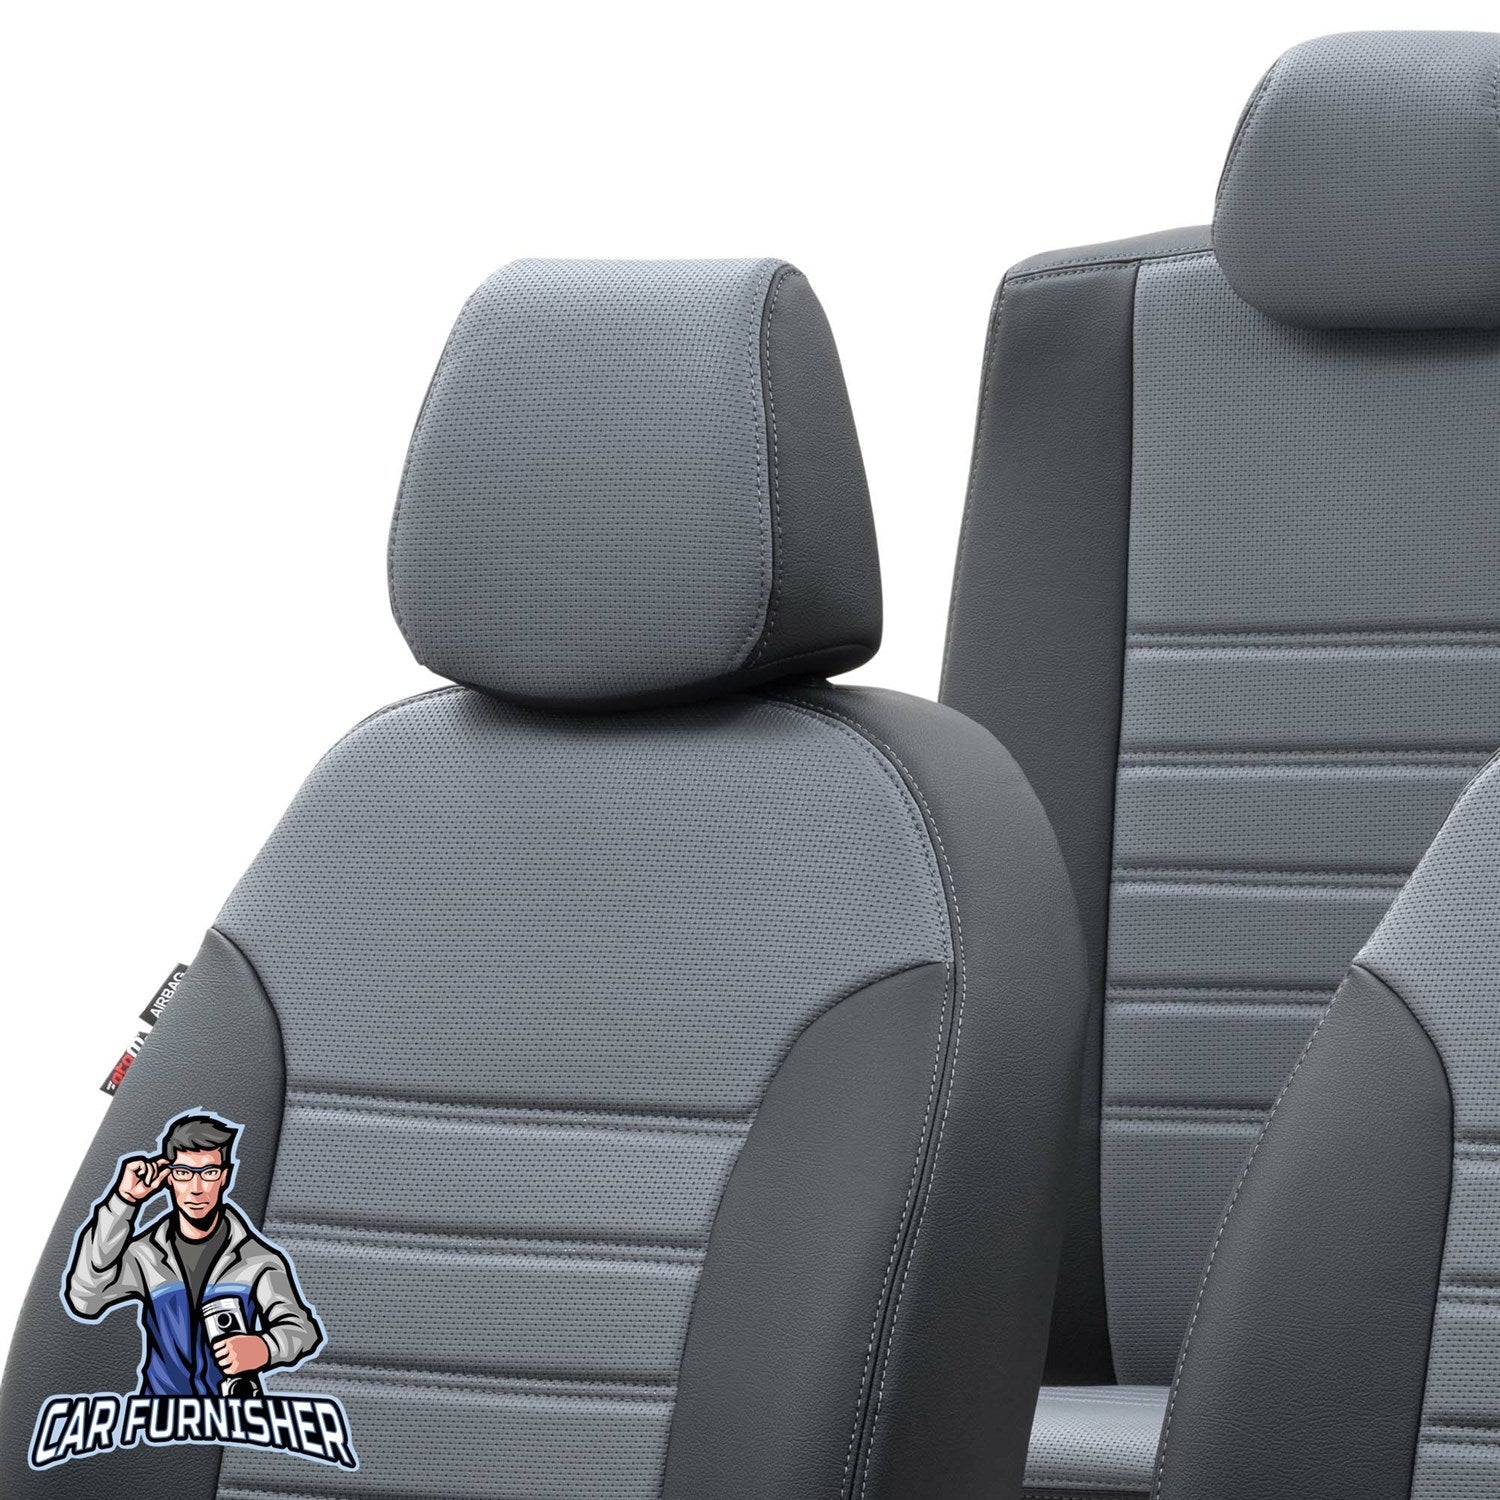 Mitsubishi Attrage Seat Covers New York Leather Design Smoked Black Leather